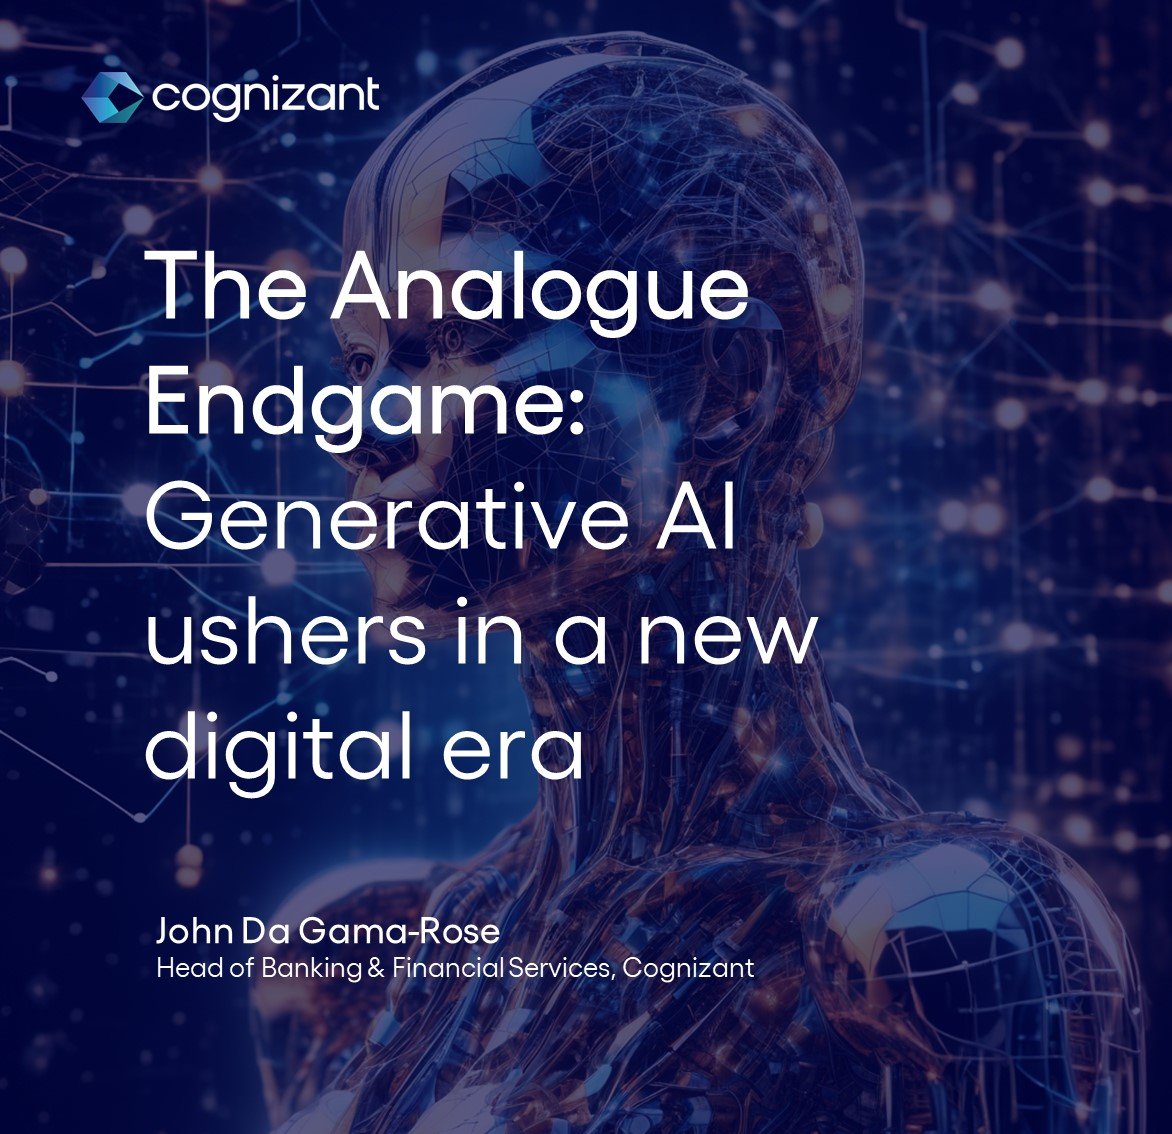 In the era of transformative innovation, financial services leaders must embrace bold leadership and a digital-first approach to thrive.

#GenerativeAI #DigitalTransformation #FinancialInnovation #Leadership #AI cogniz.at/4cRAFBY